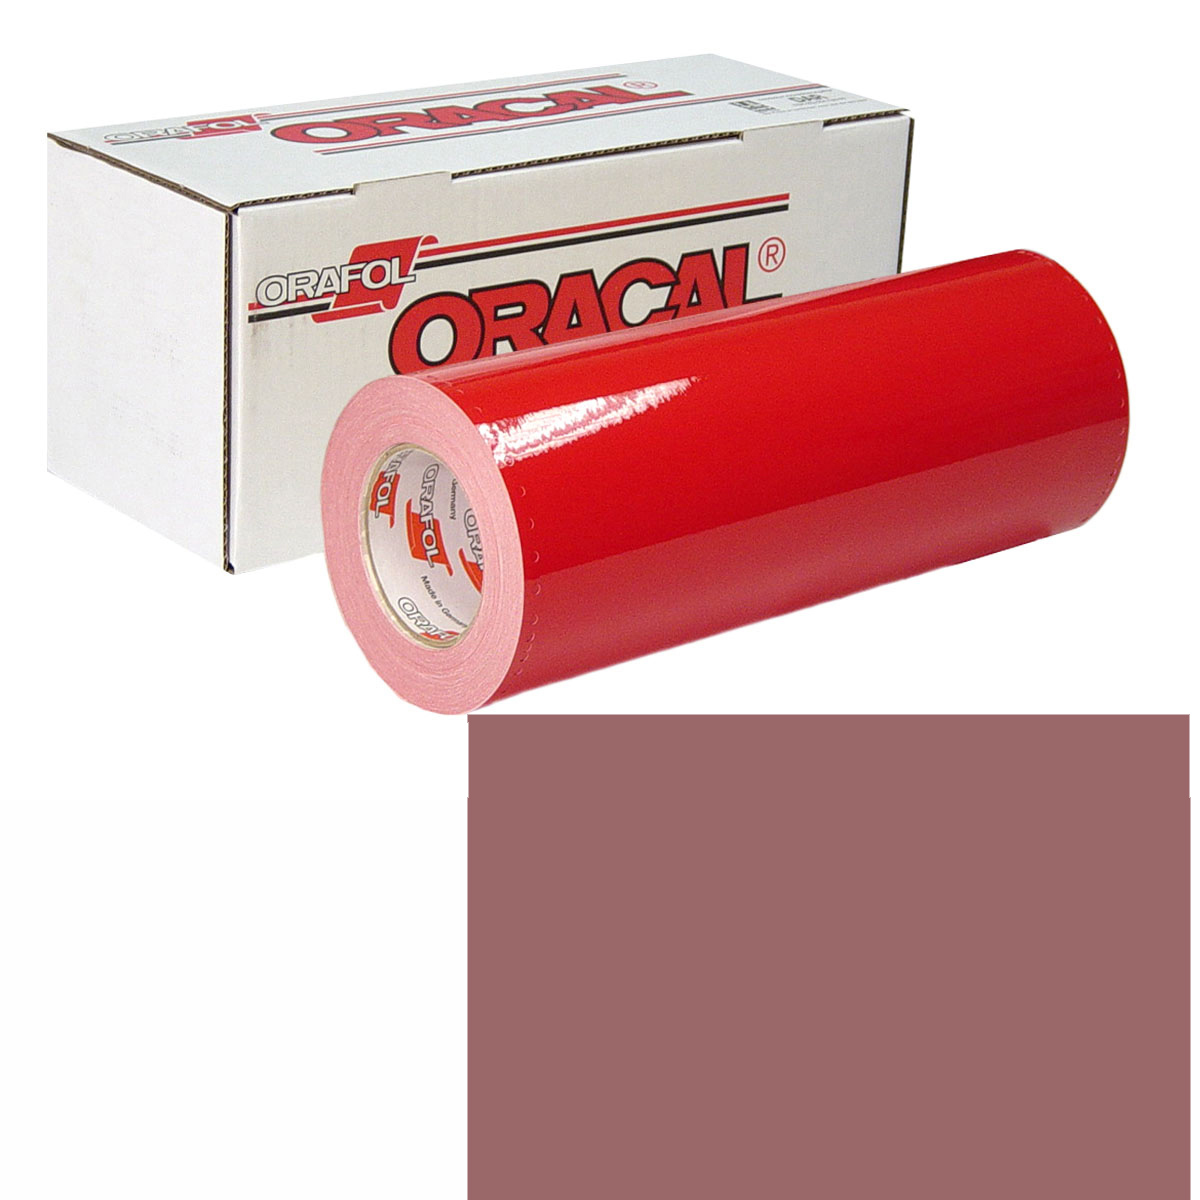 ORACAL 951 15in X 50yd 079 Red Brown